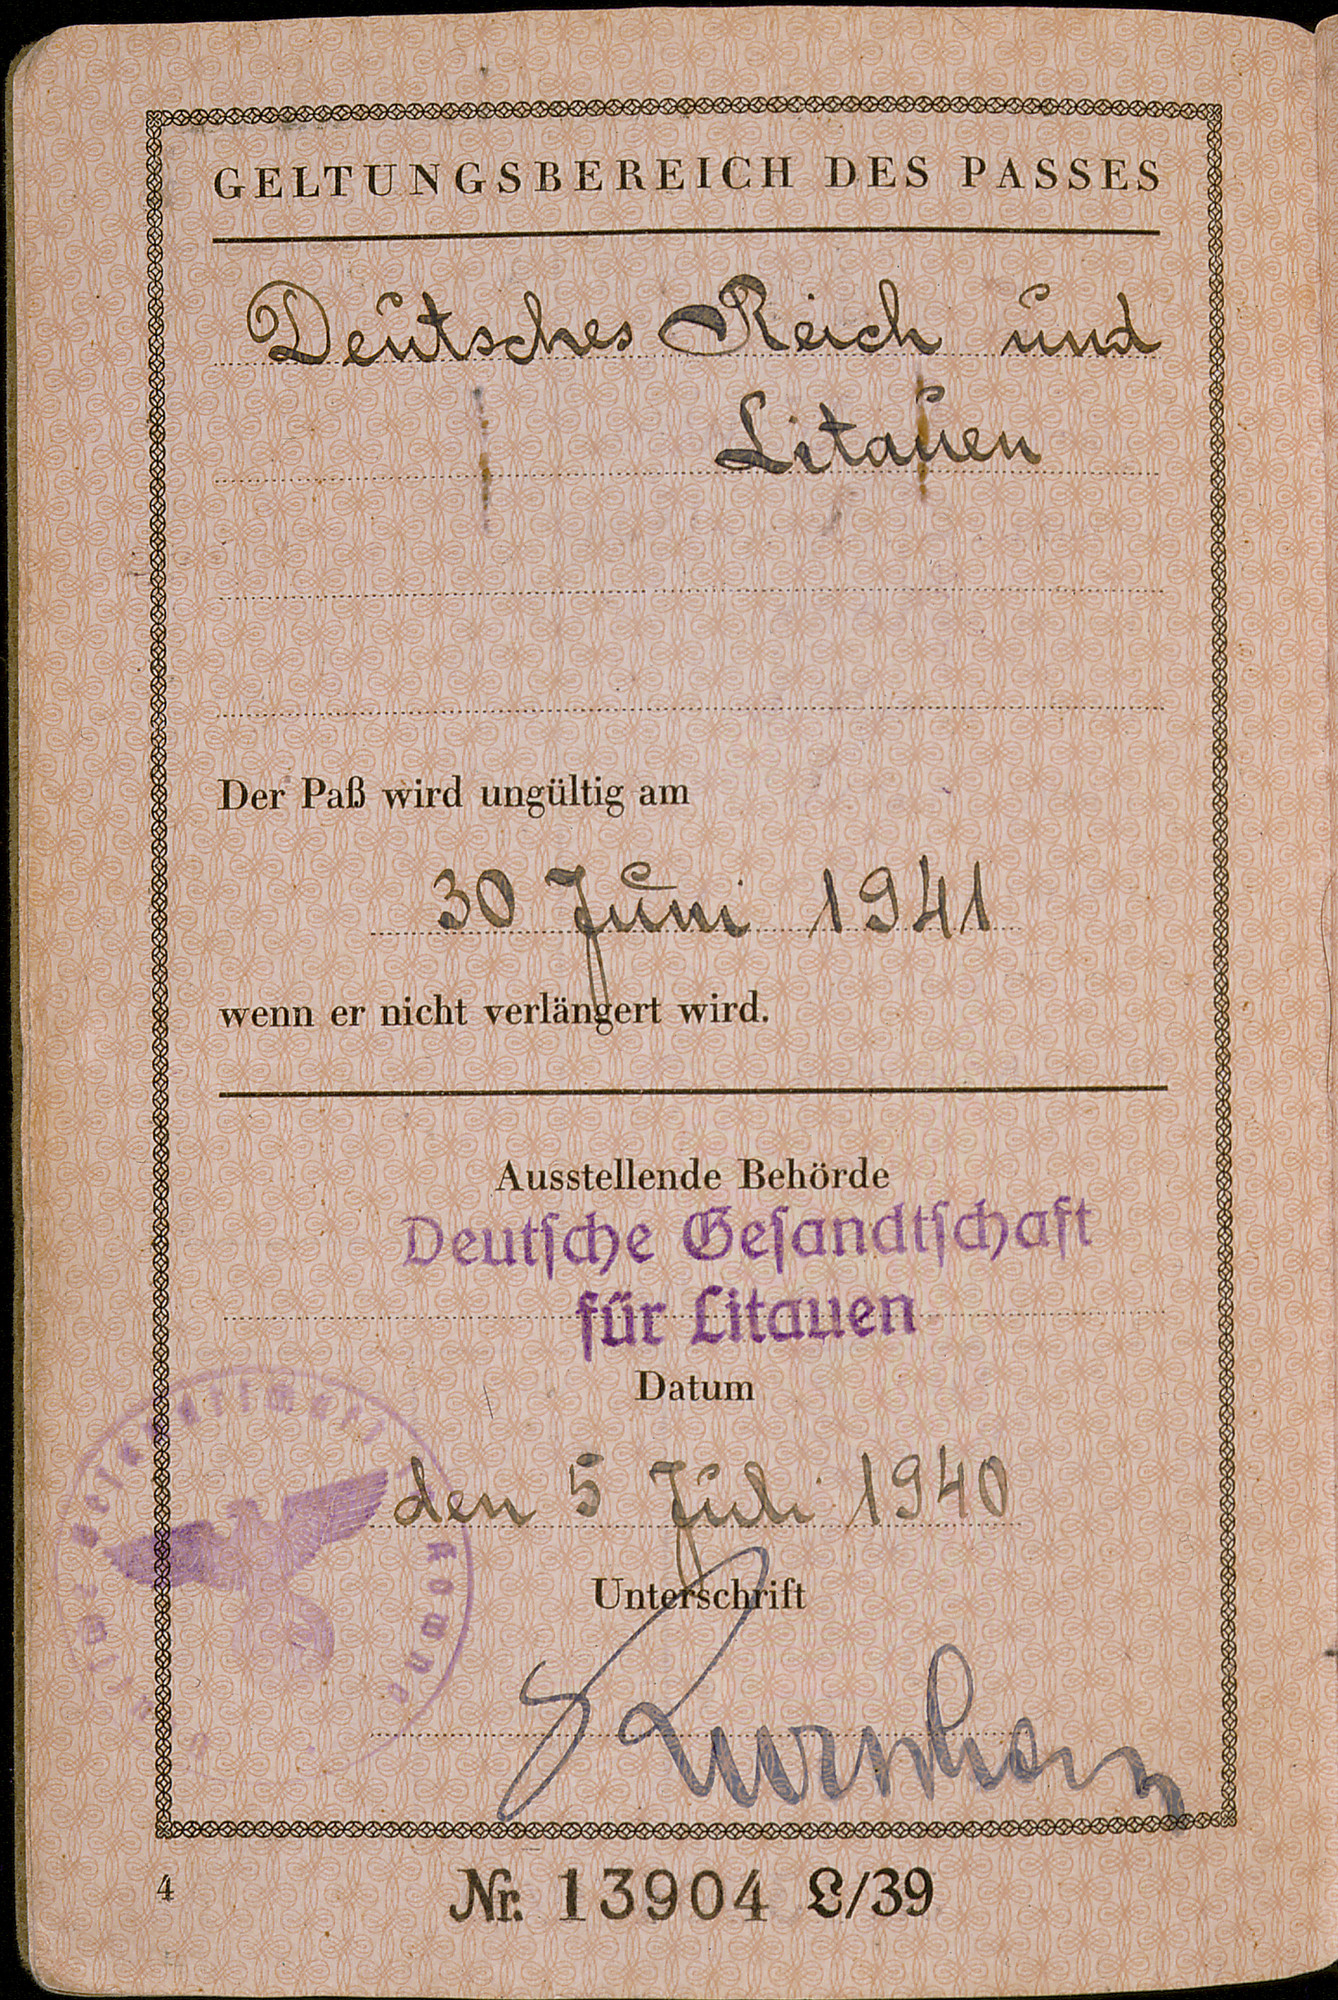 German passport issued to Moritz Sondheimer by the German Consulate in Kaunas.

German Jews were commonly required to add "Israel" to their names if male, and "Sara" if female.  Jewish passports were further distinguished by a "J," signifying "Jude" (Jew), stamped in red on the first page.